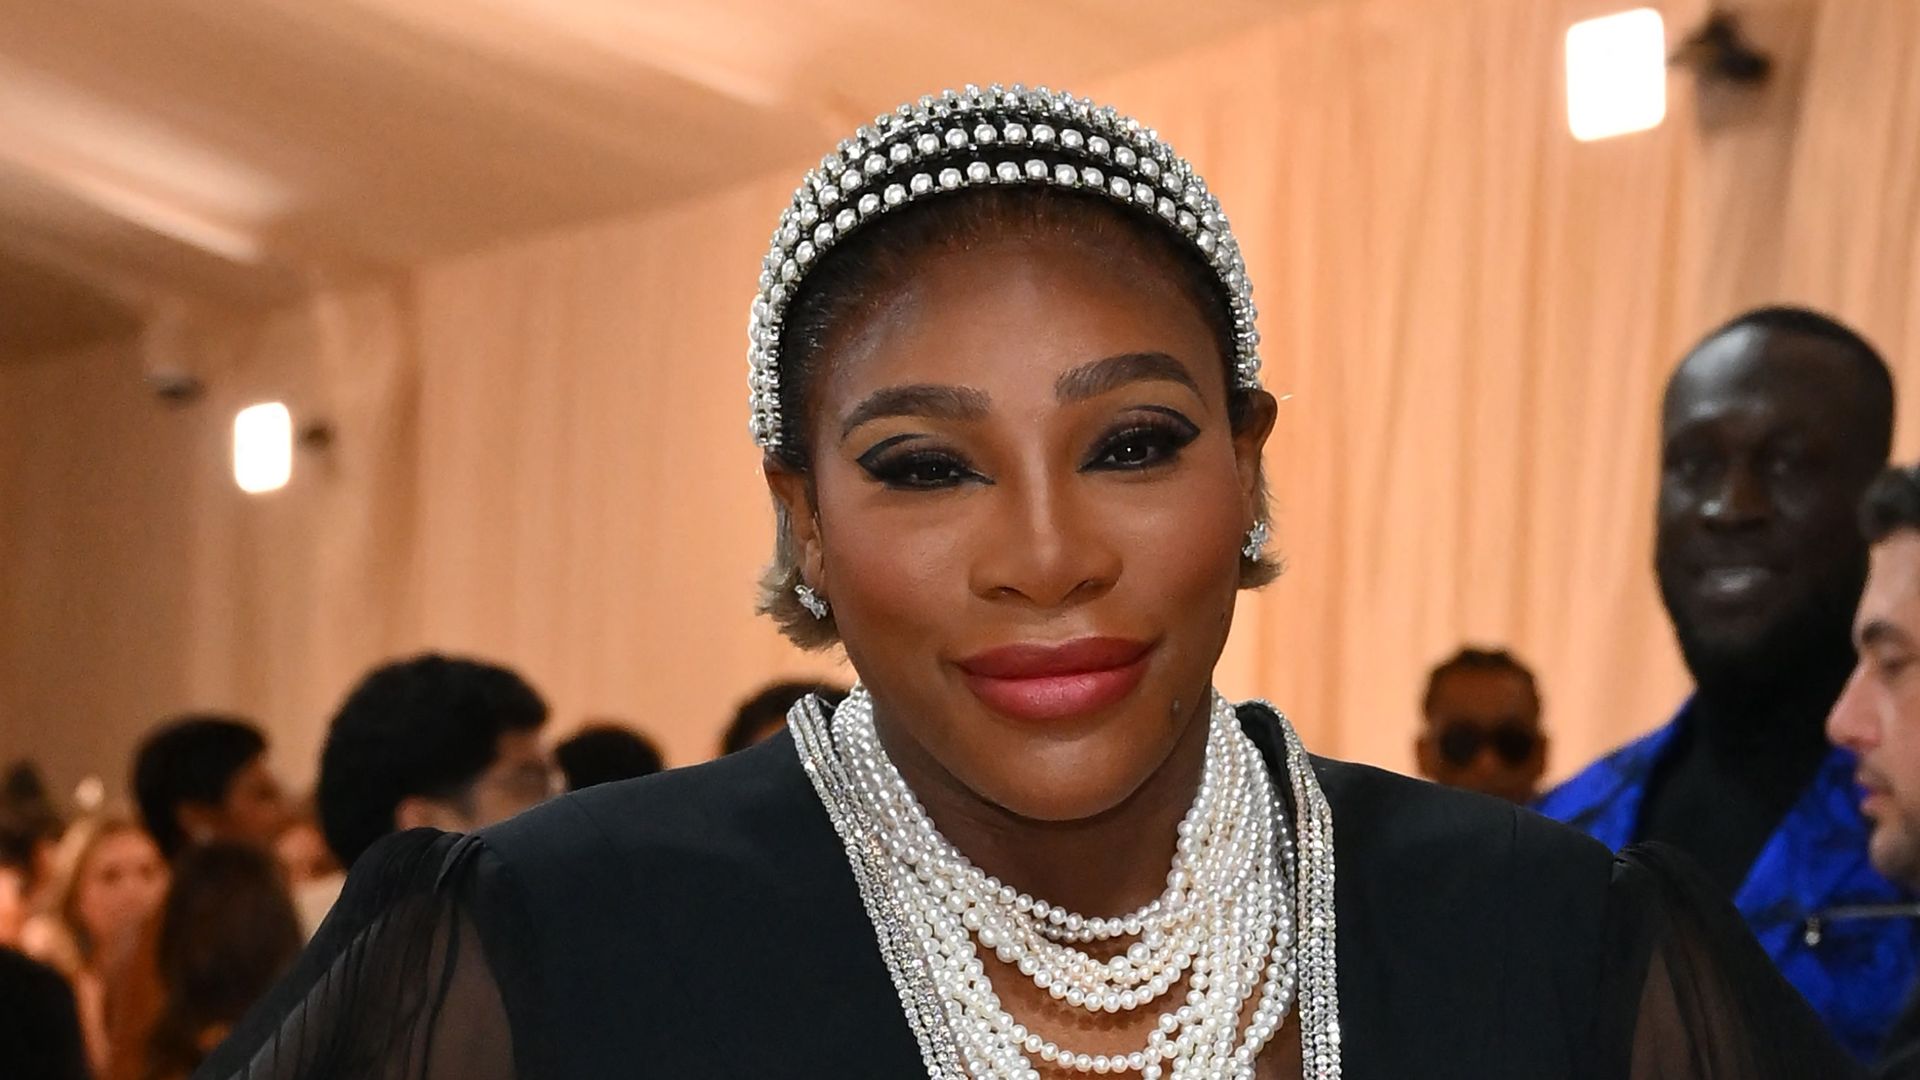 Serena Williams showcases baby bump in bra and mini skirt after Met